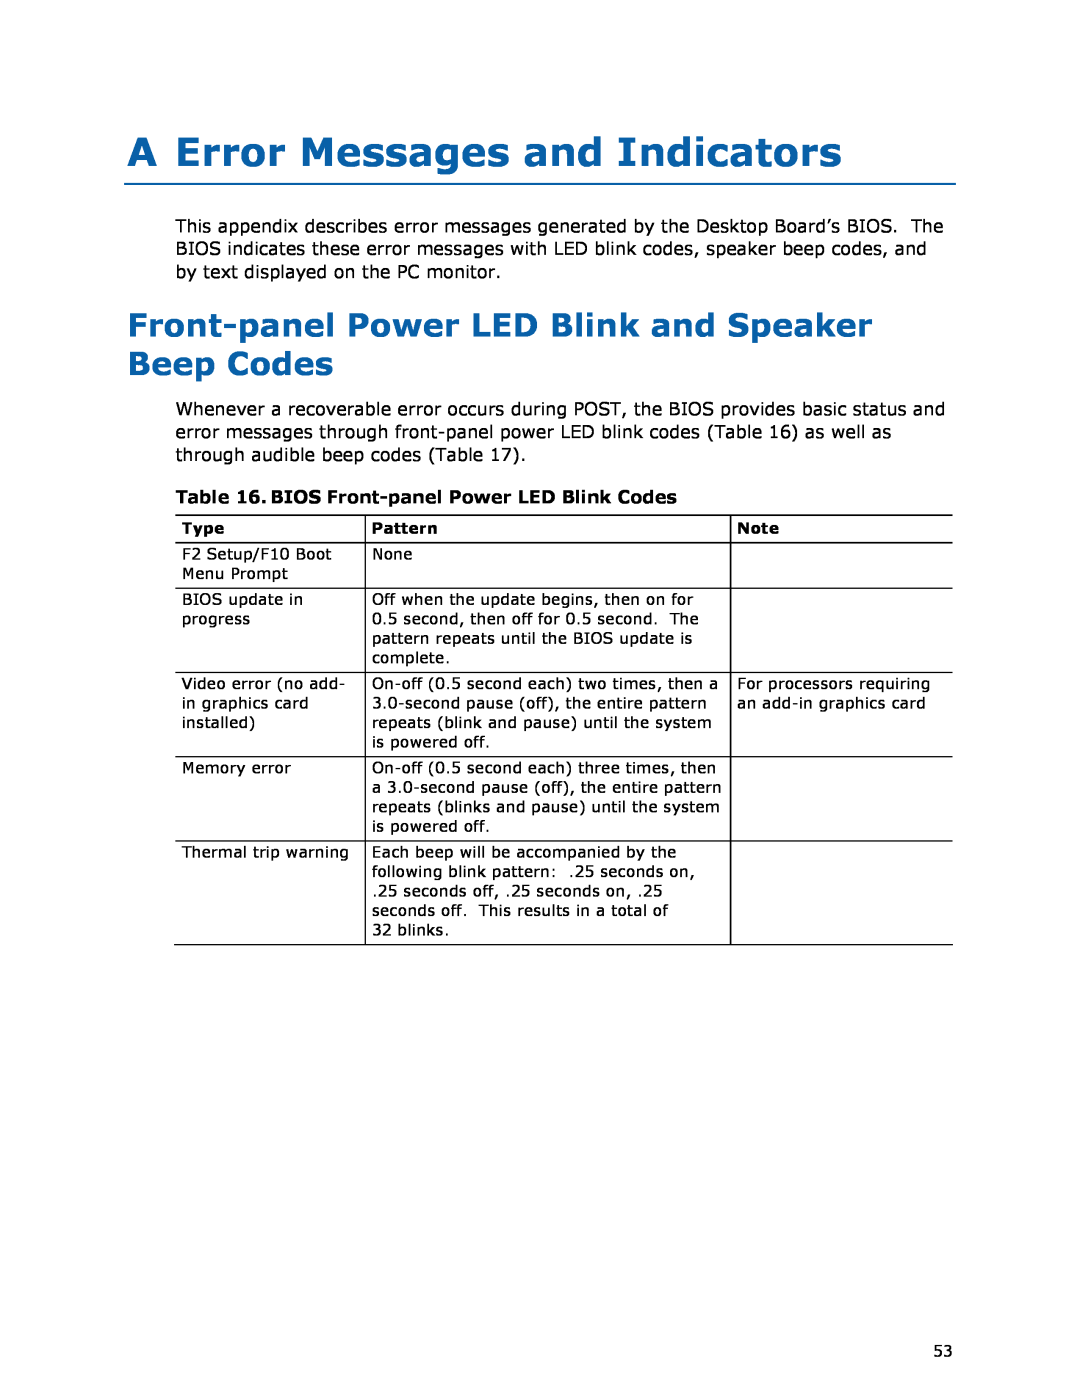 Intel BOXDH61AG manual A Error Messages and Indicators, Front-panel Power LED Blink and Speaker Beep Codes 